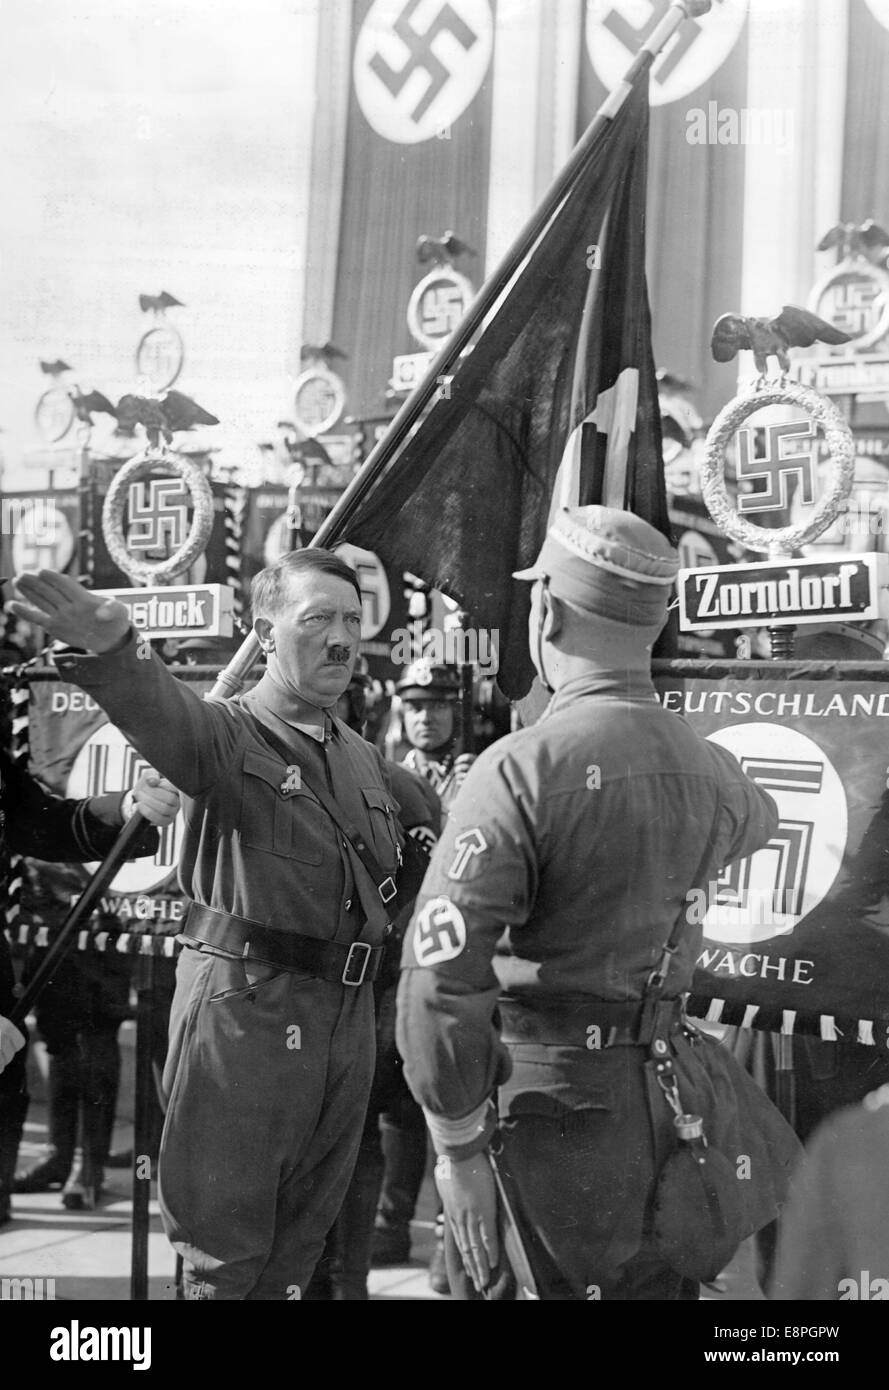 Nuremberg Rally 1936 in Nuremberg, Germany - New standards are consecrated with the 'Blood Flag' (behind Hitler) by Adolf Hitler during the great roll call of Sturmtruppe (SA), Schutzstaffel (SS) and National Socialist Motor Corps (NSKK) at Luitpoldarena at the Nazi party rally grounds. New standards of SA and SS were 'consecrated' by touching them to the 'Blood Flag', which supposedly was carried in the failed Beer Hall Putsch. (Flaws in quality due to the historic picture copy) Fotoarchiv für Zeitgeschichtee - NO WIRE SERVICE - Stock Photo